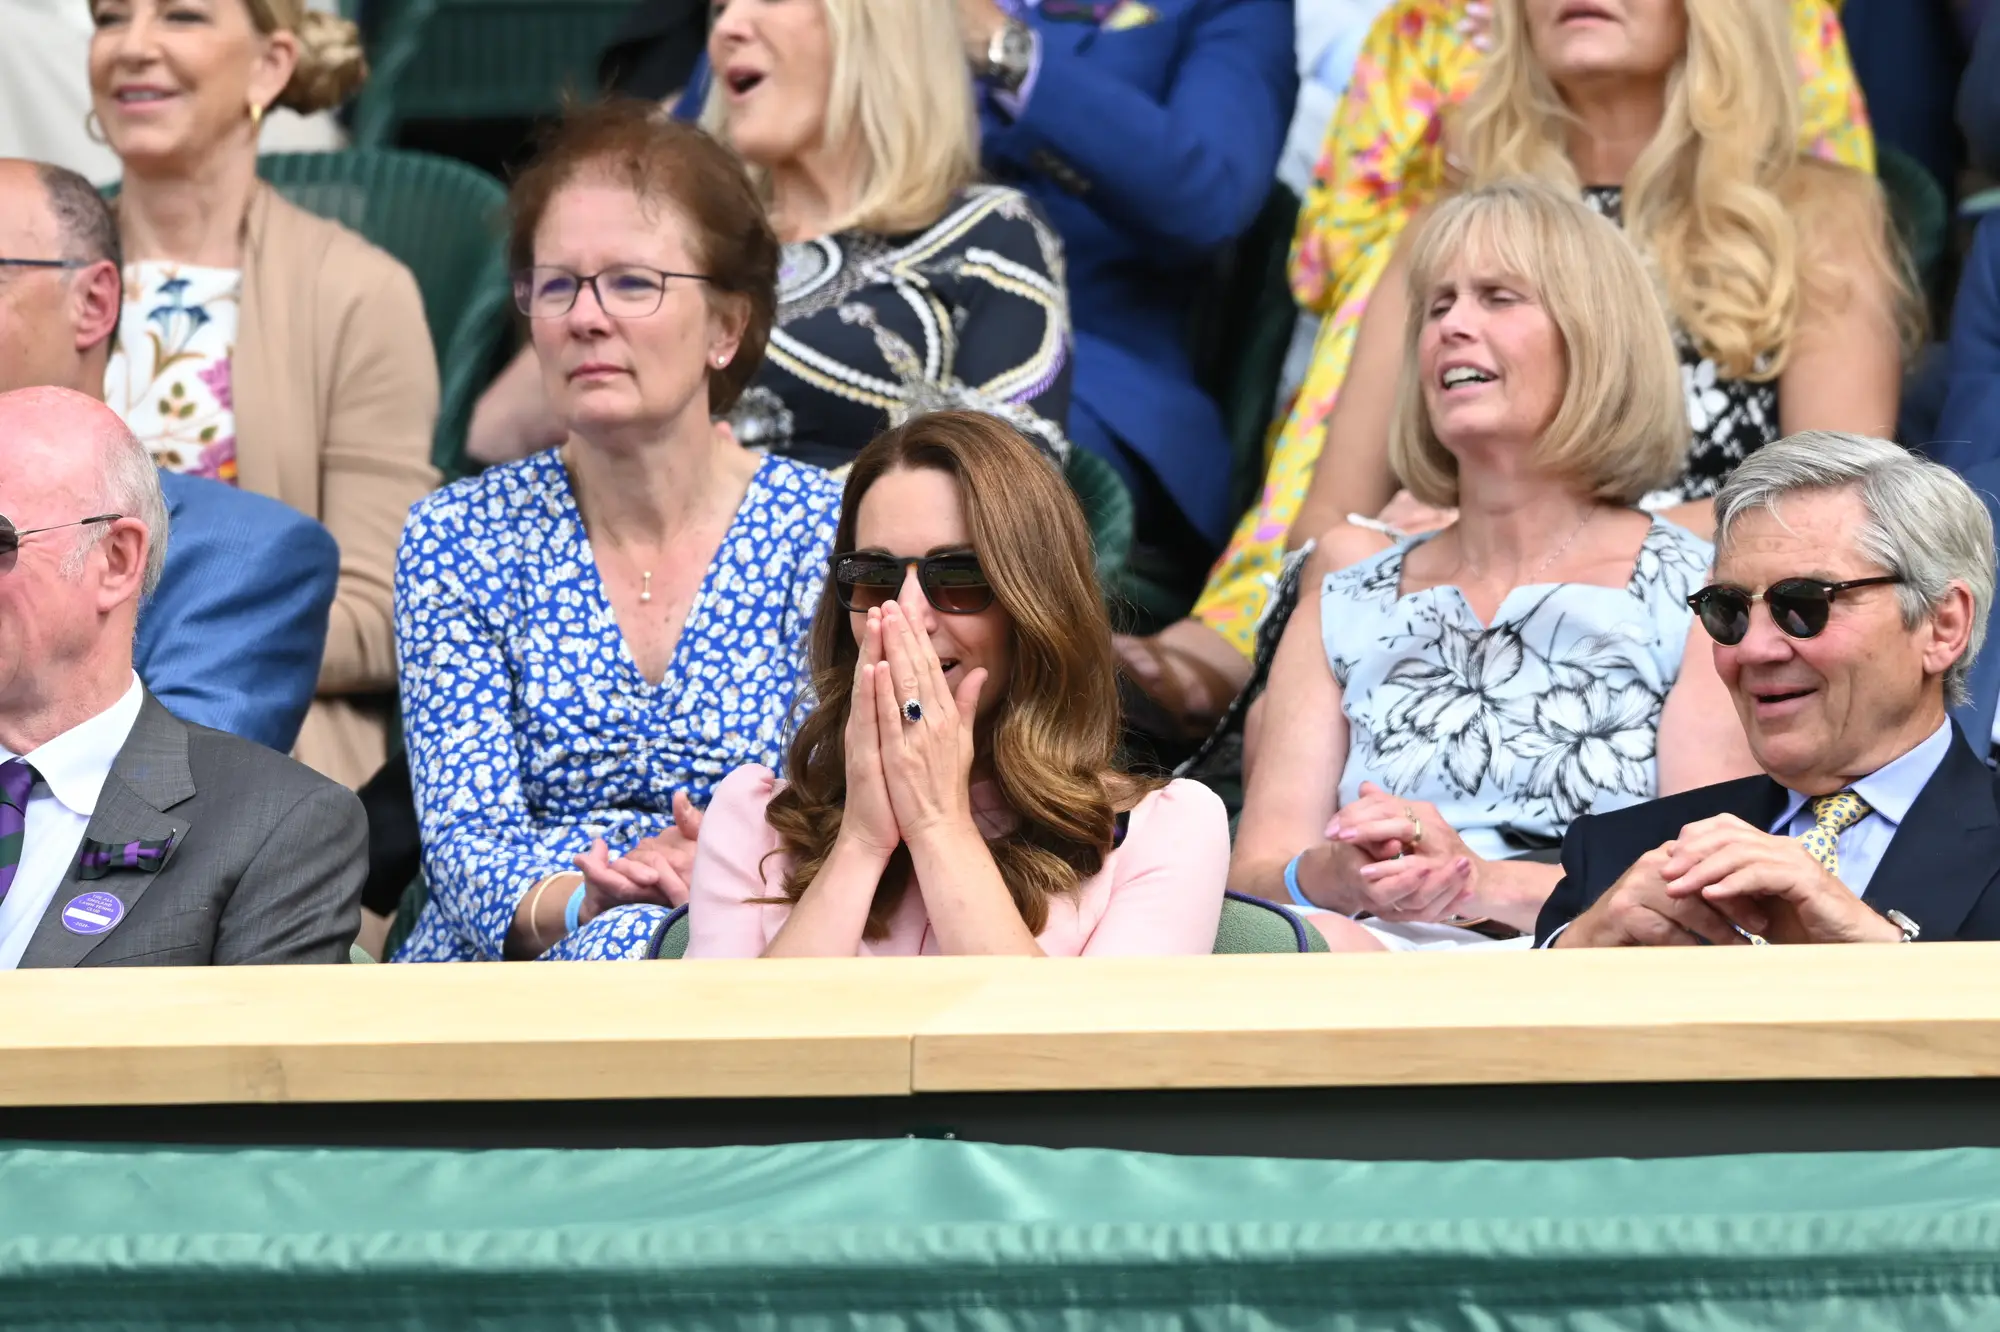 The Duchess of Cambridge and Michael Middleton were in the front row of Royal Box to see World Number one Novak Djokovic playing against Italian Matteo Berrettini.